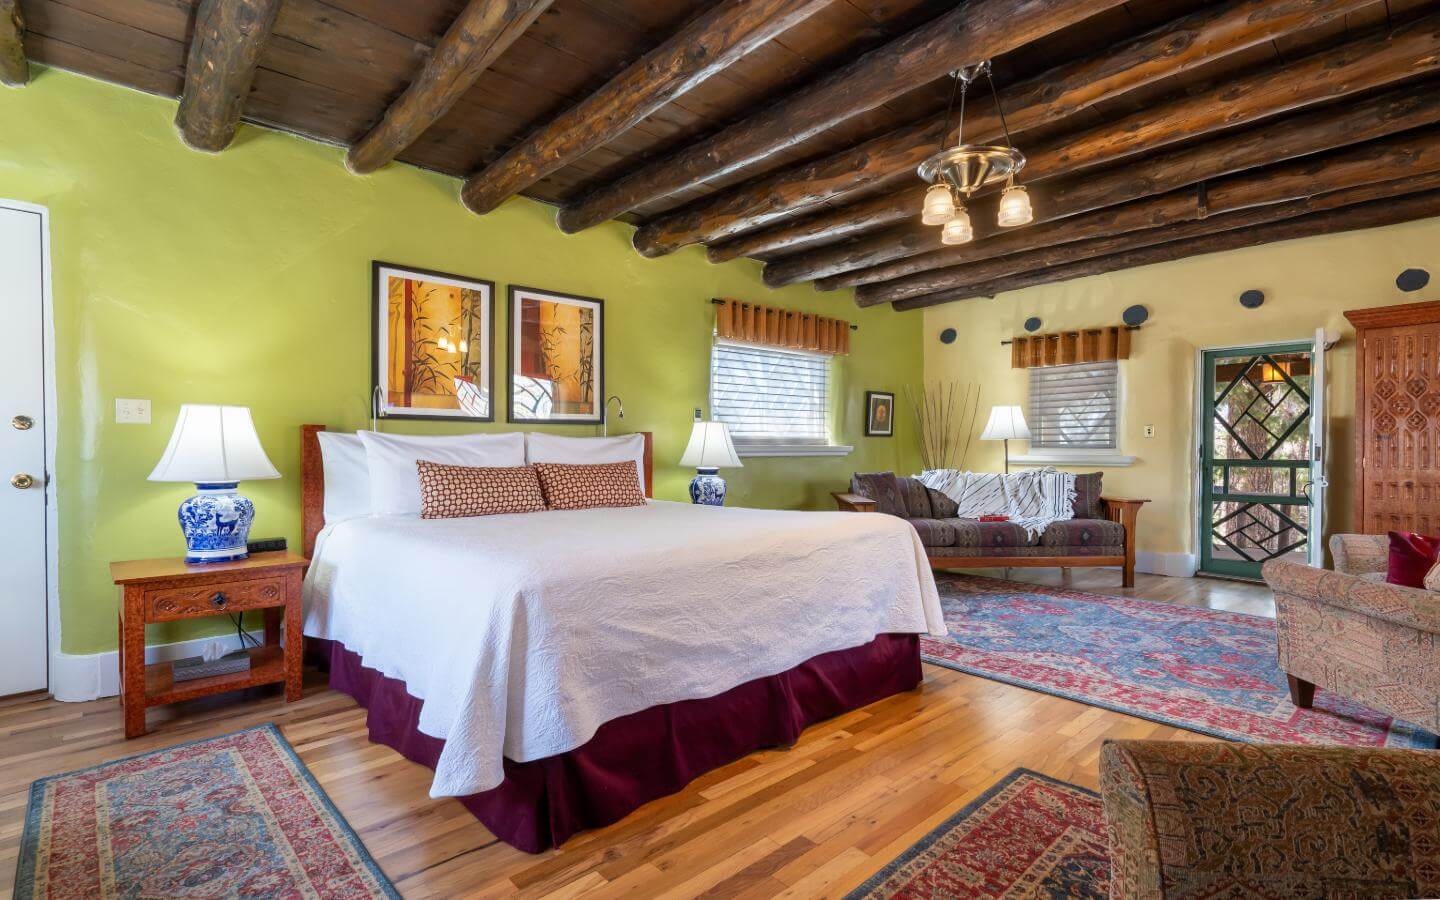 Santa Fe New Mexico Bed and Breakfast - Witter Bynner Room